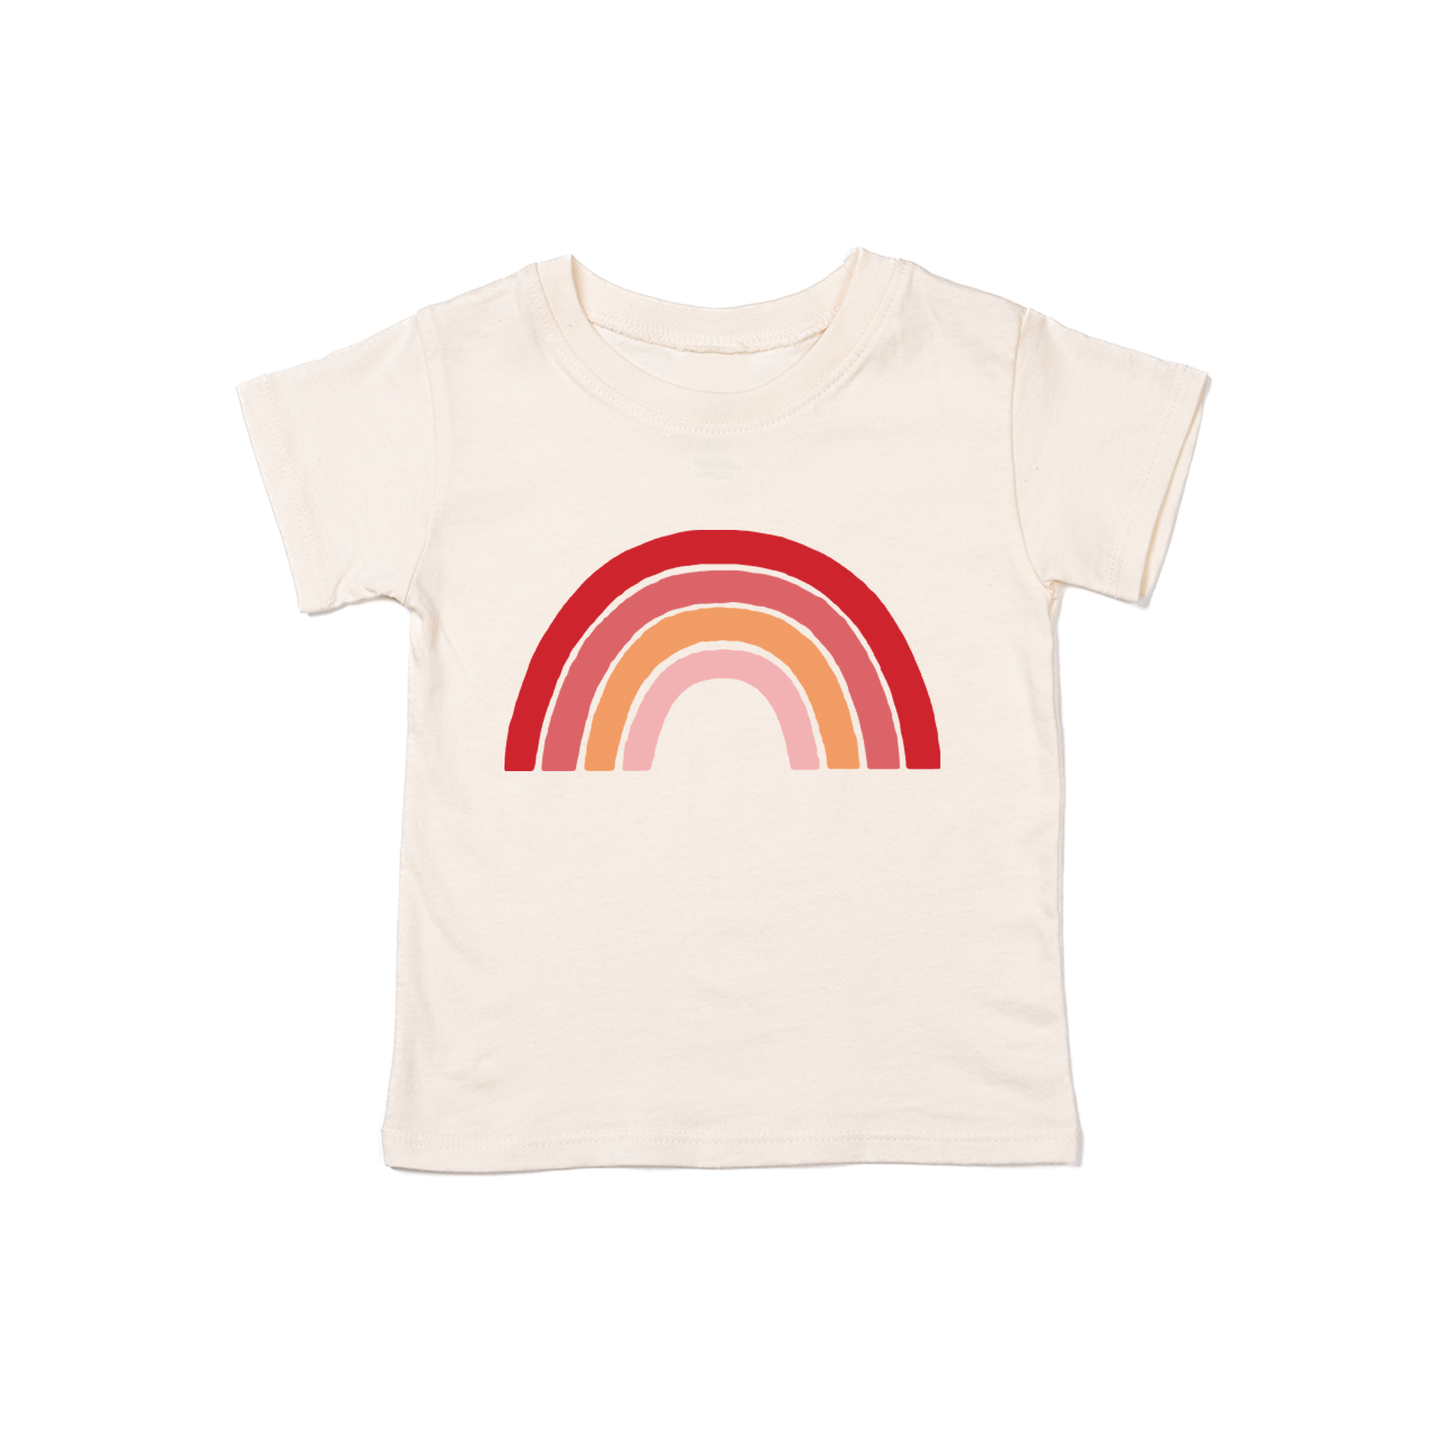 Shades of Red Rainbow - Kids Tee (Natural)